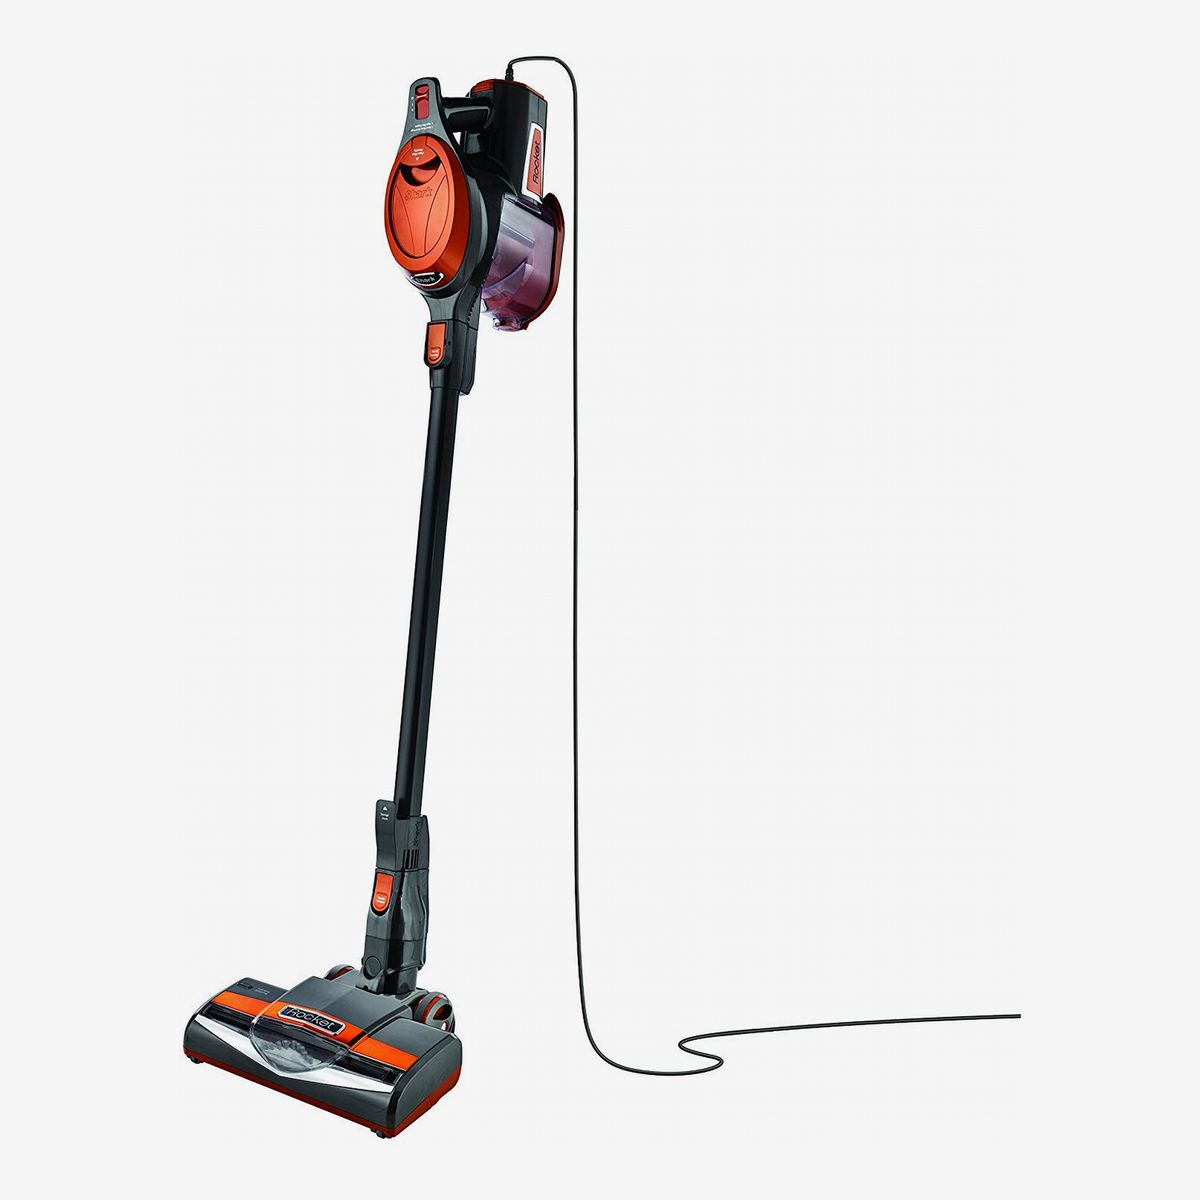 18 Best Vacuums For Pet Hair 2022 The, Best Stick Vacuum For Pet Hair And Hardwood Floors Carpet